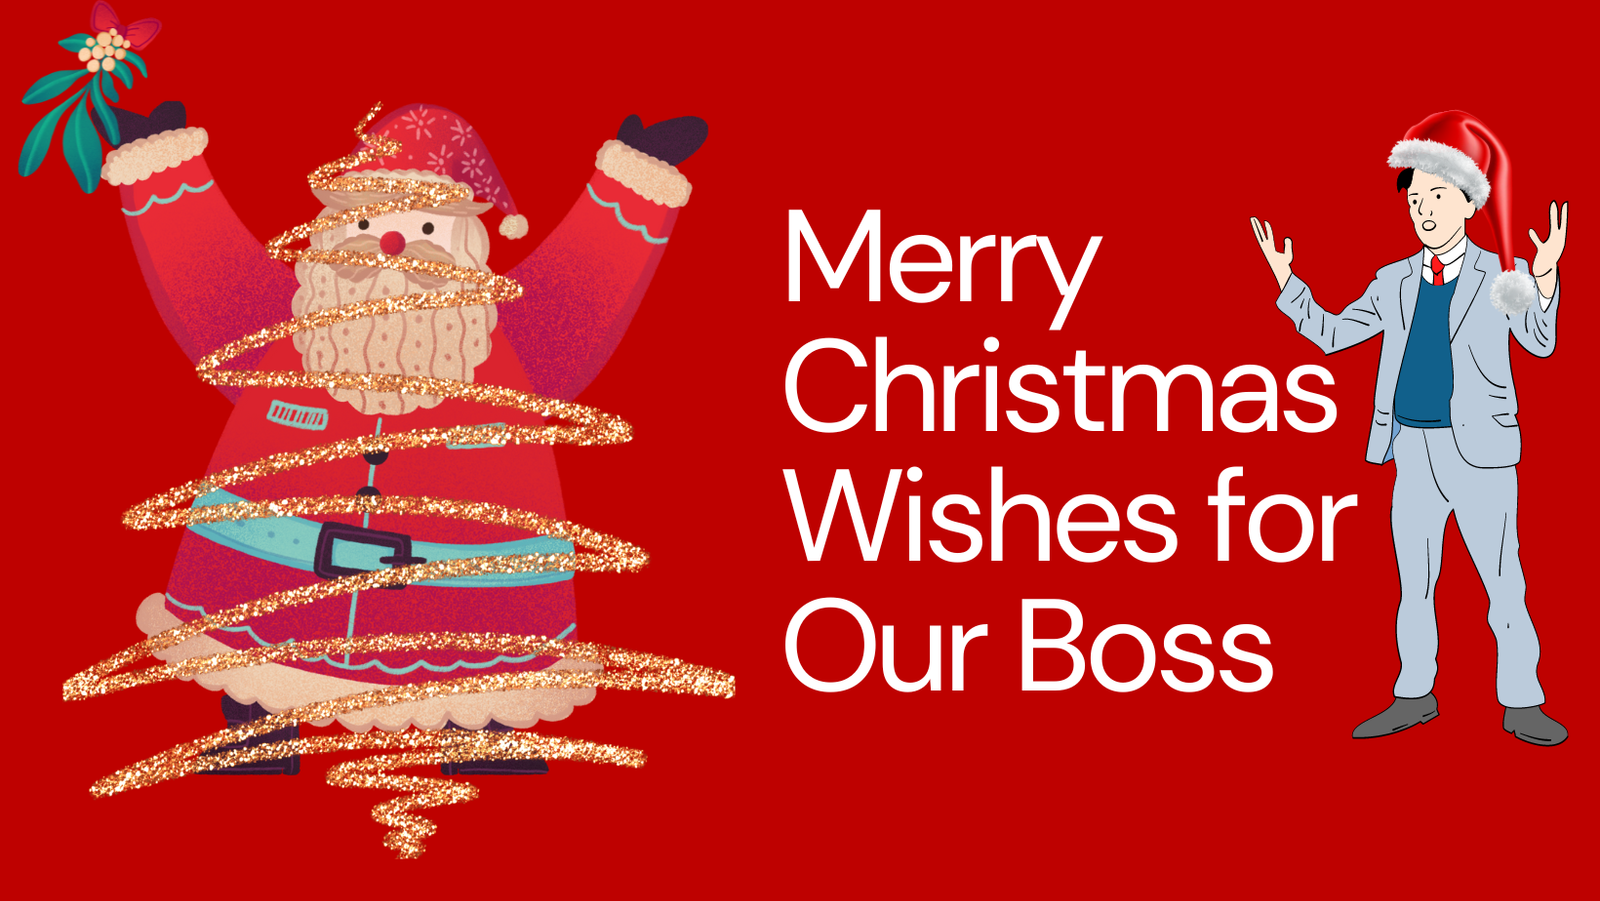 Top 15 Heartfelt Merry Christmas Wishes for Boss: Spread Cheer and Appreciation